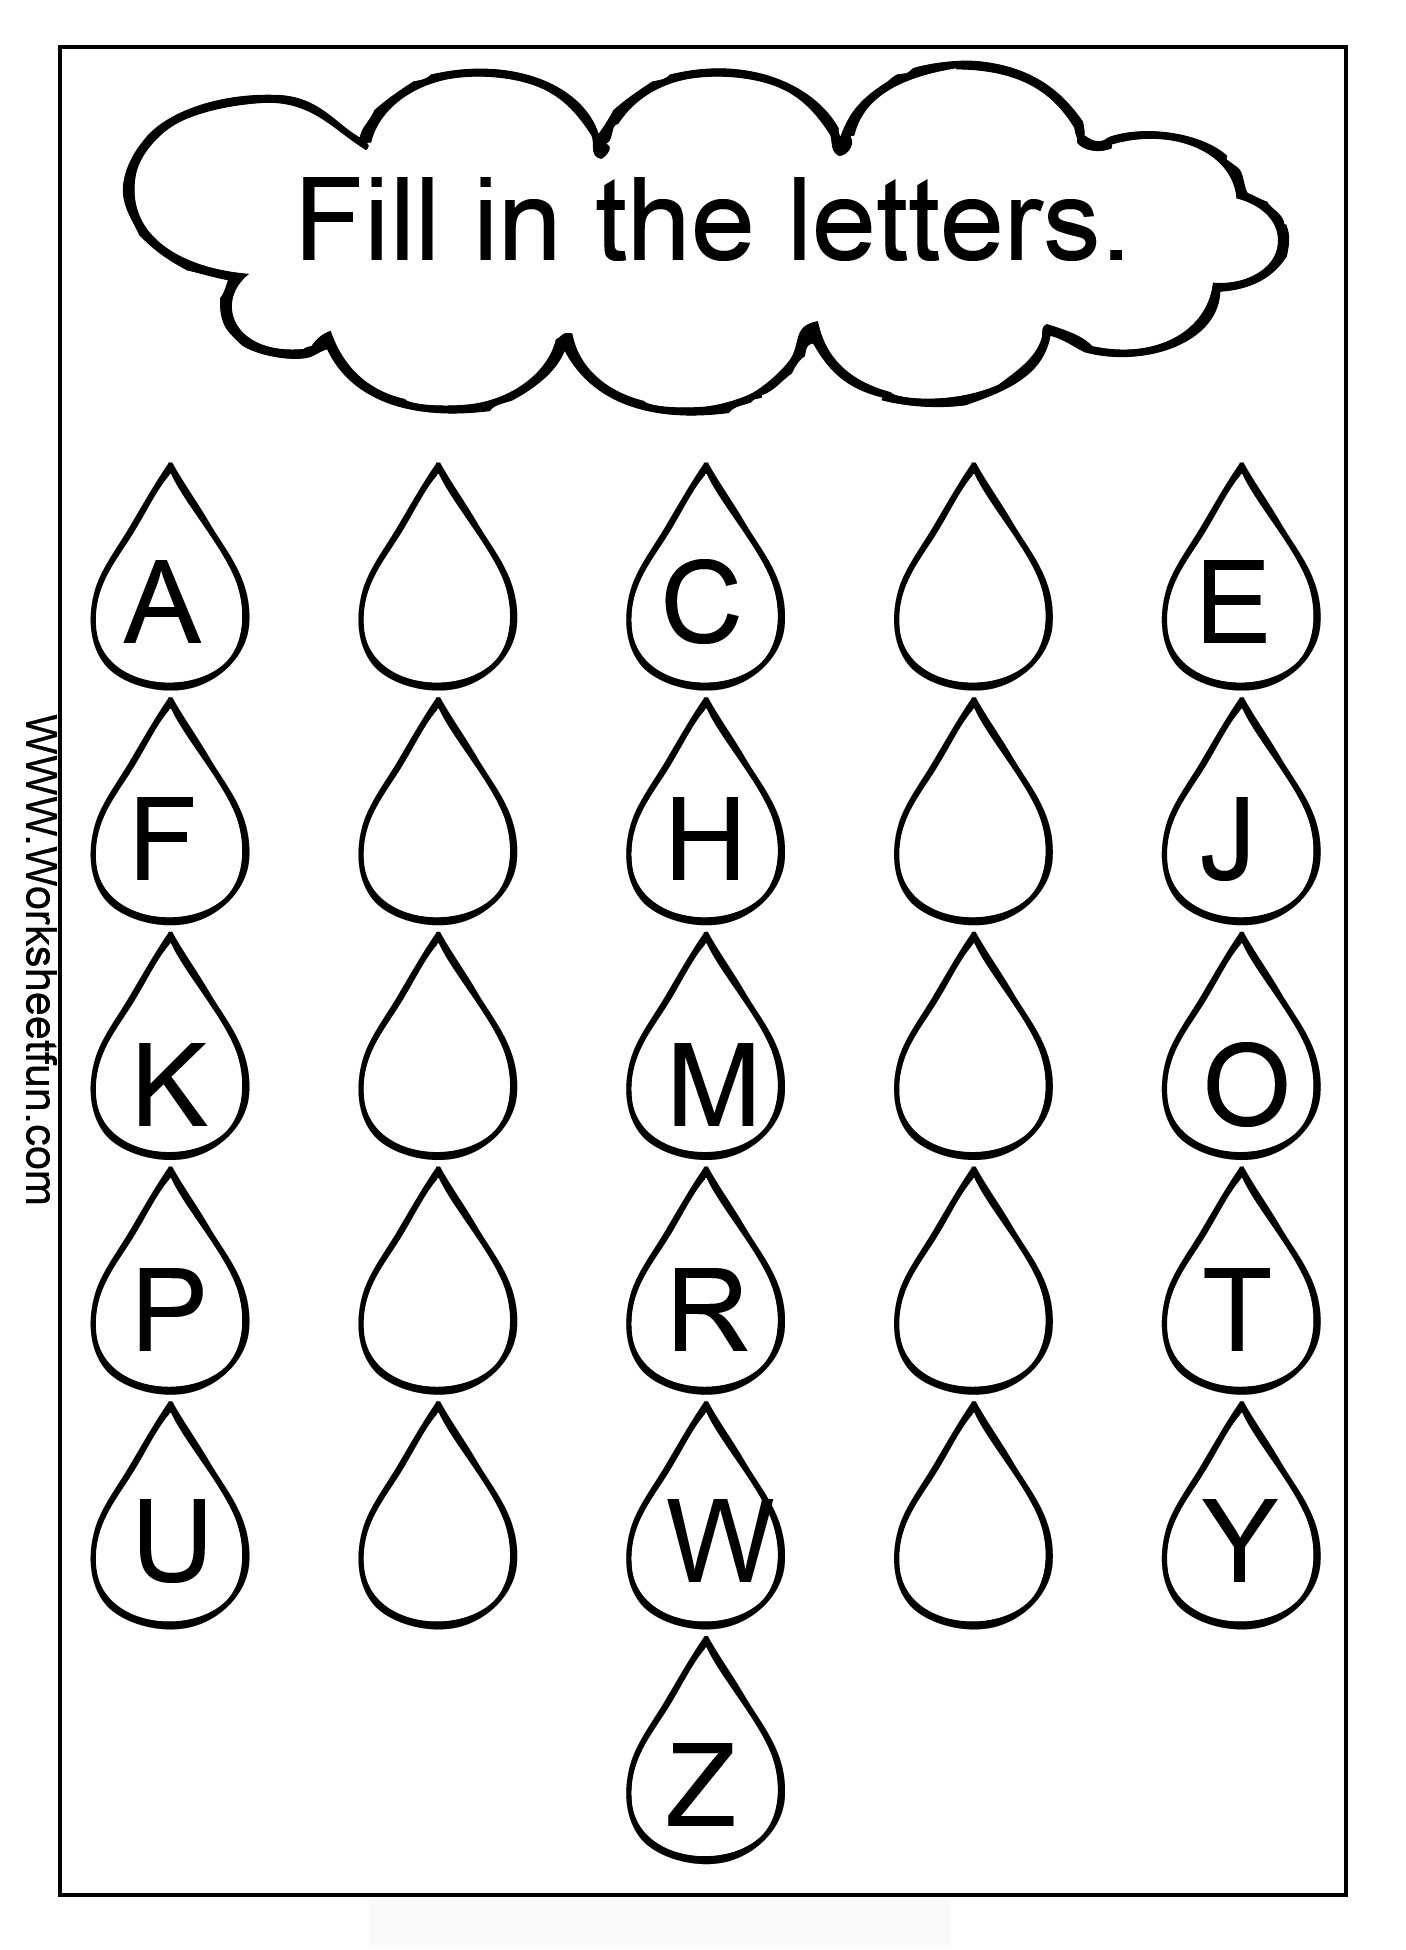 Alphabet Tracing Worksheets for 3 Year Olds together with Alphabet Worksheets for Preschool Pdf Myscres